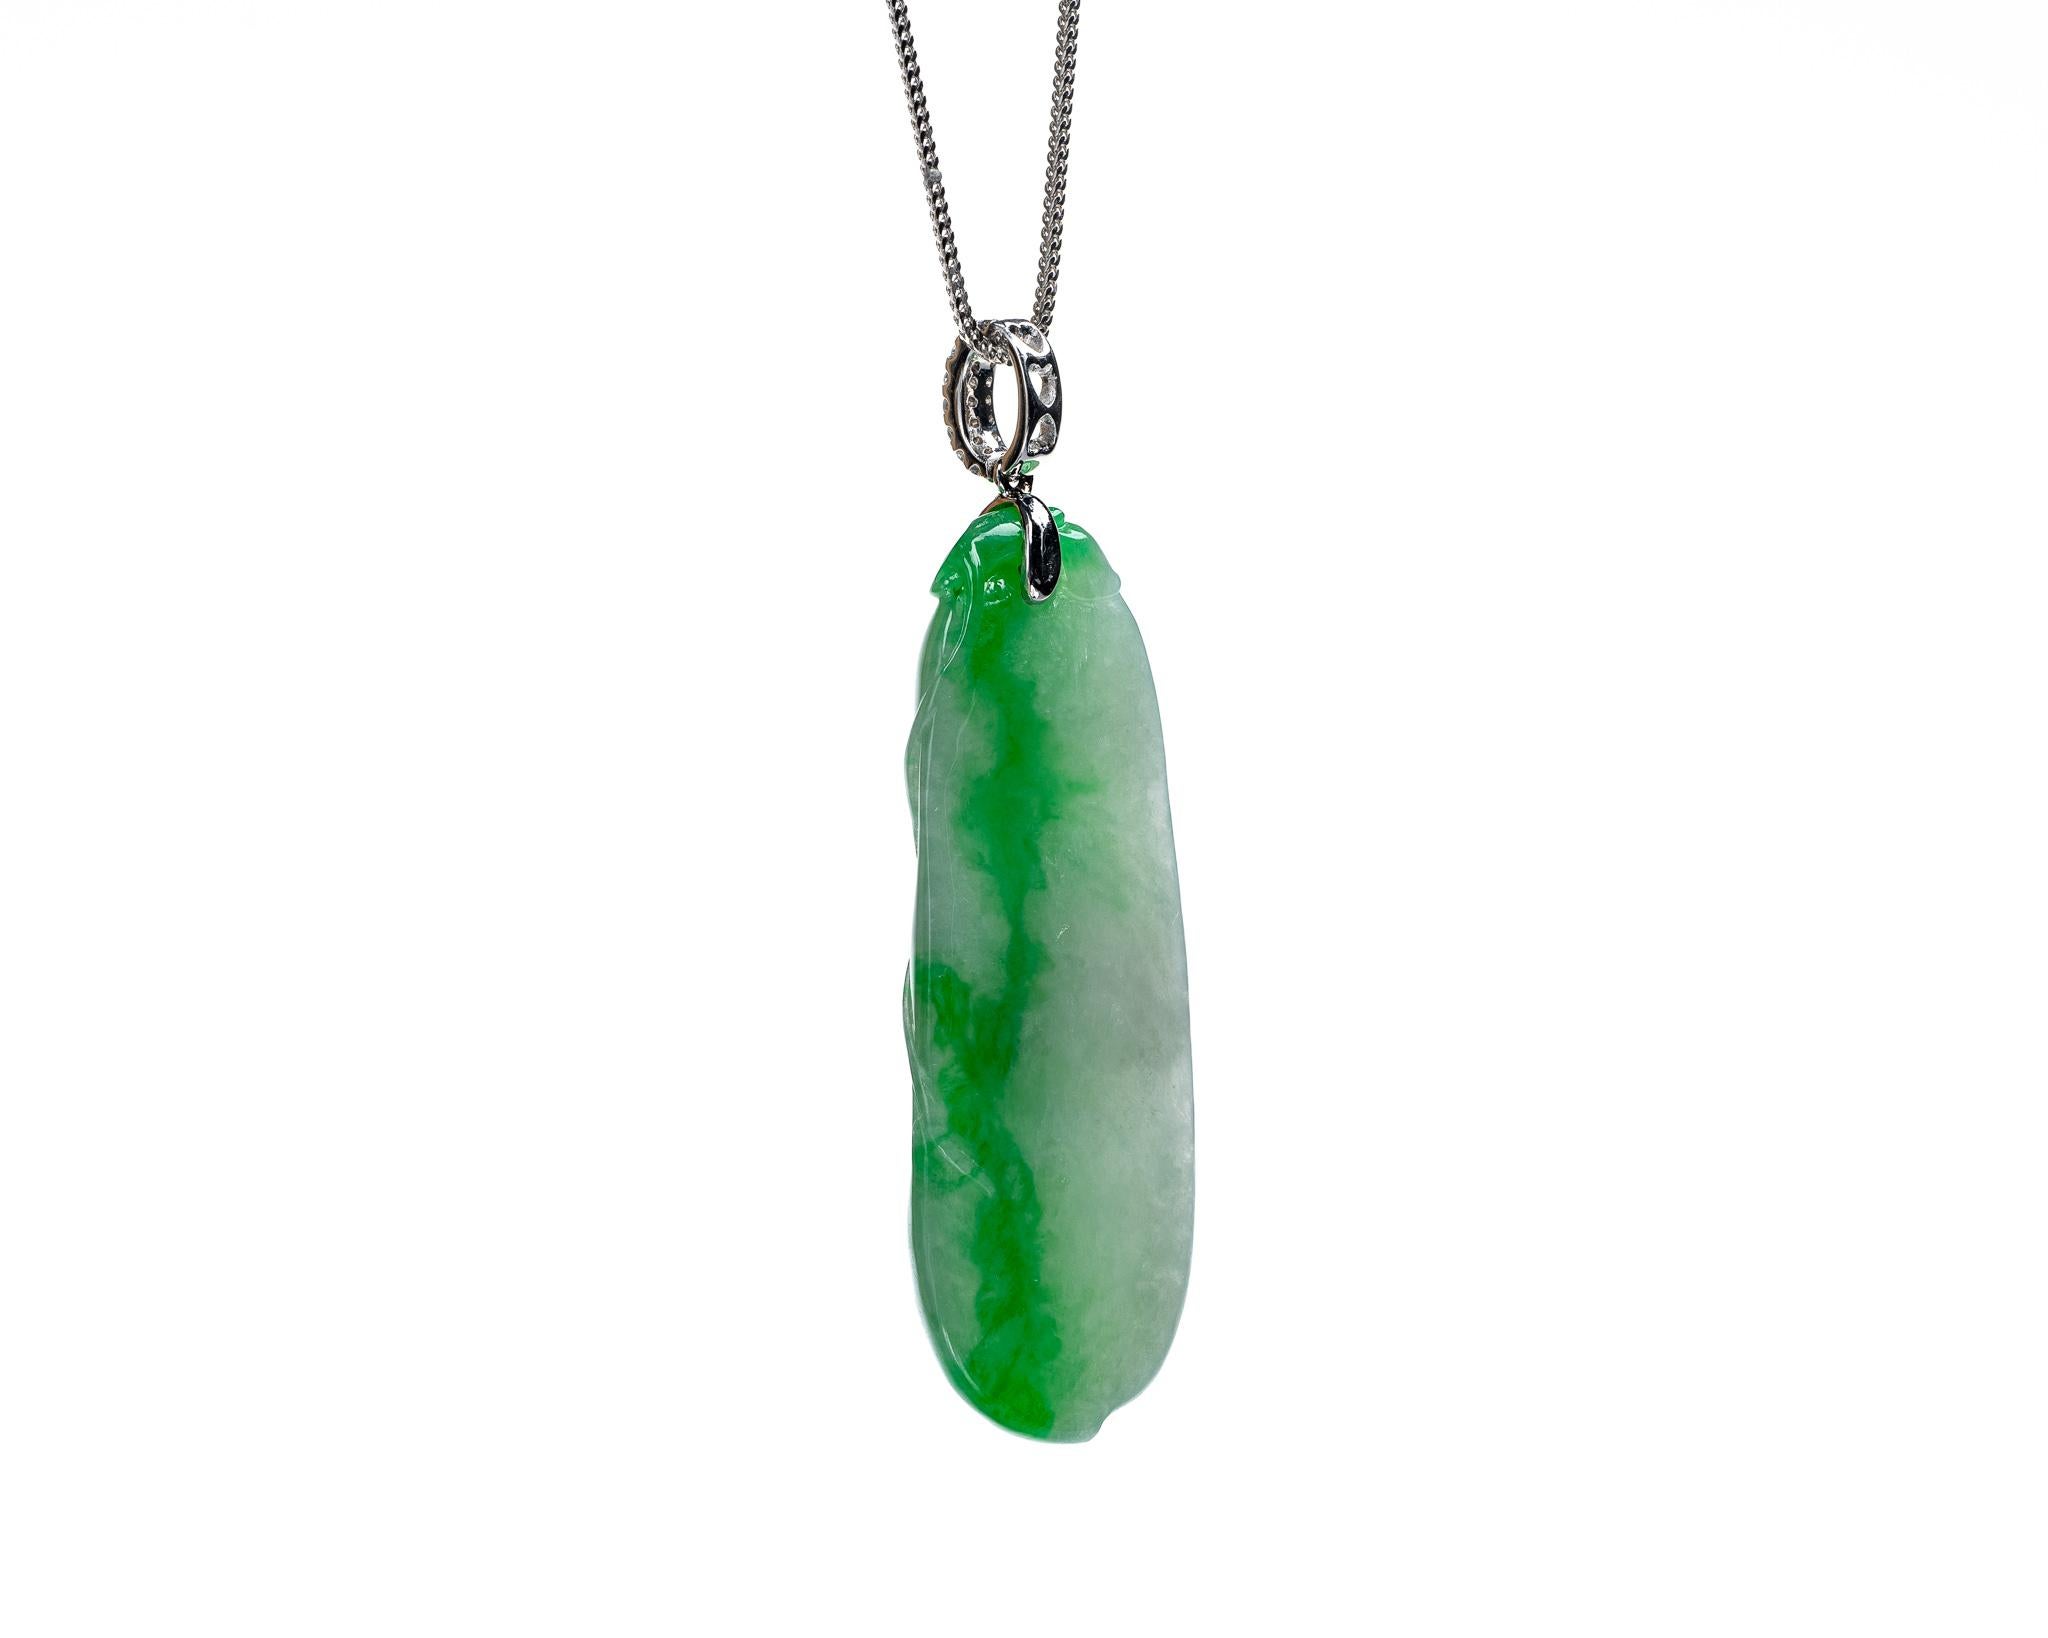 This is an all natural, untreated jadeite jade carved peapod pendant set on an 18K white gold and diamond bail.  The carved peapod represents happiness, prosperity and longevity. 

It measures 0.81 inches (20.5 mm) x 2.05 inches (52.1 mm) with